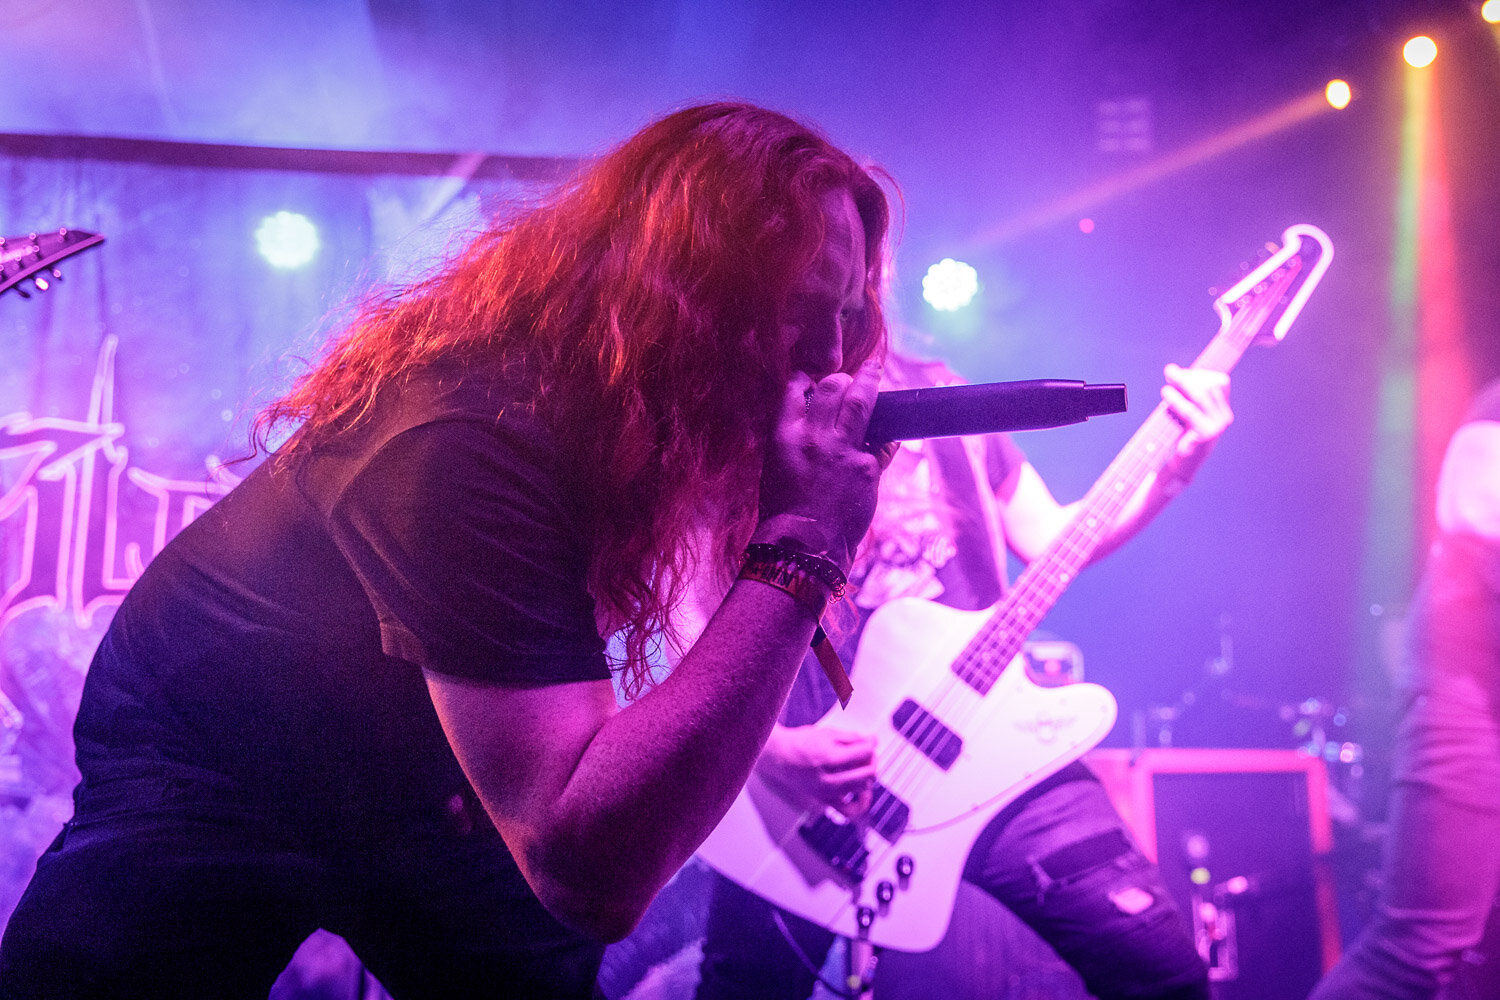 Frozen In Shadows at Rebellion in Manchester on February 16th 2020